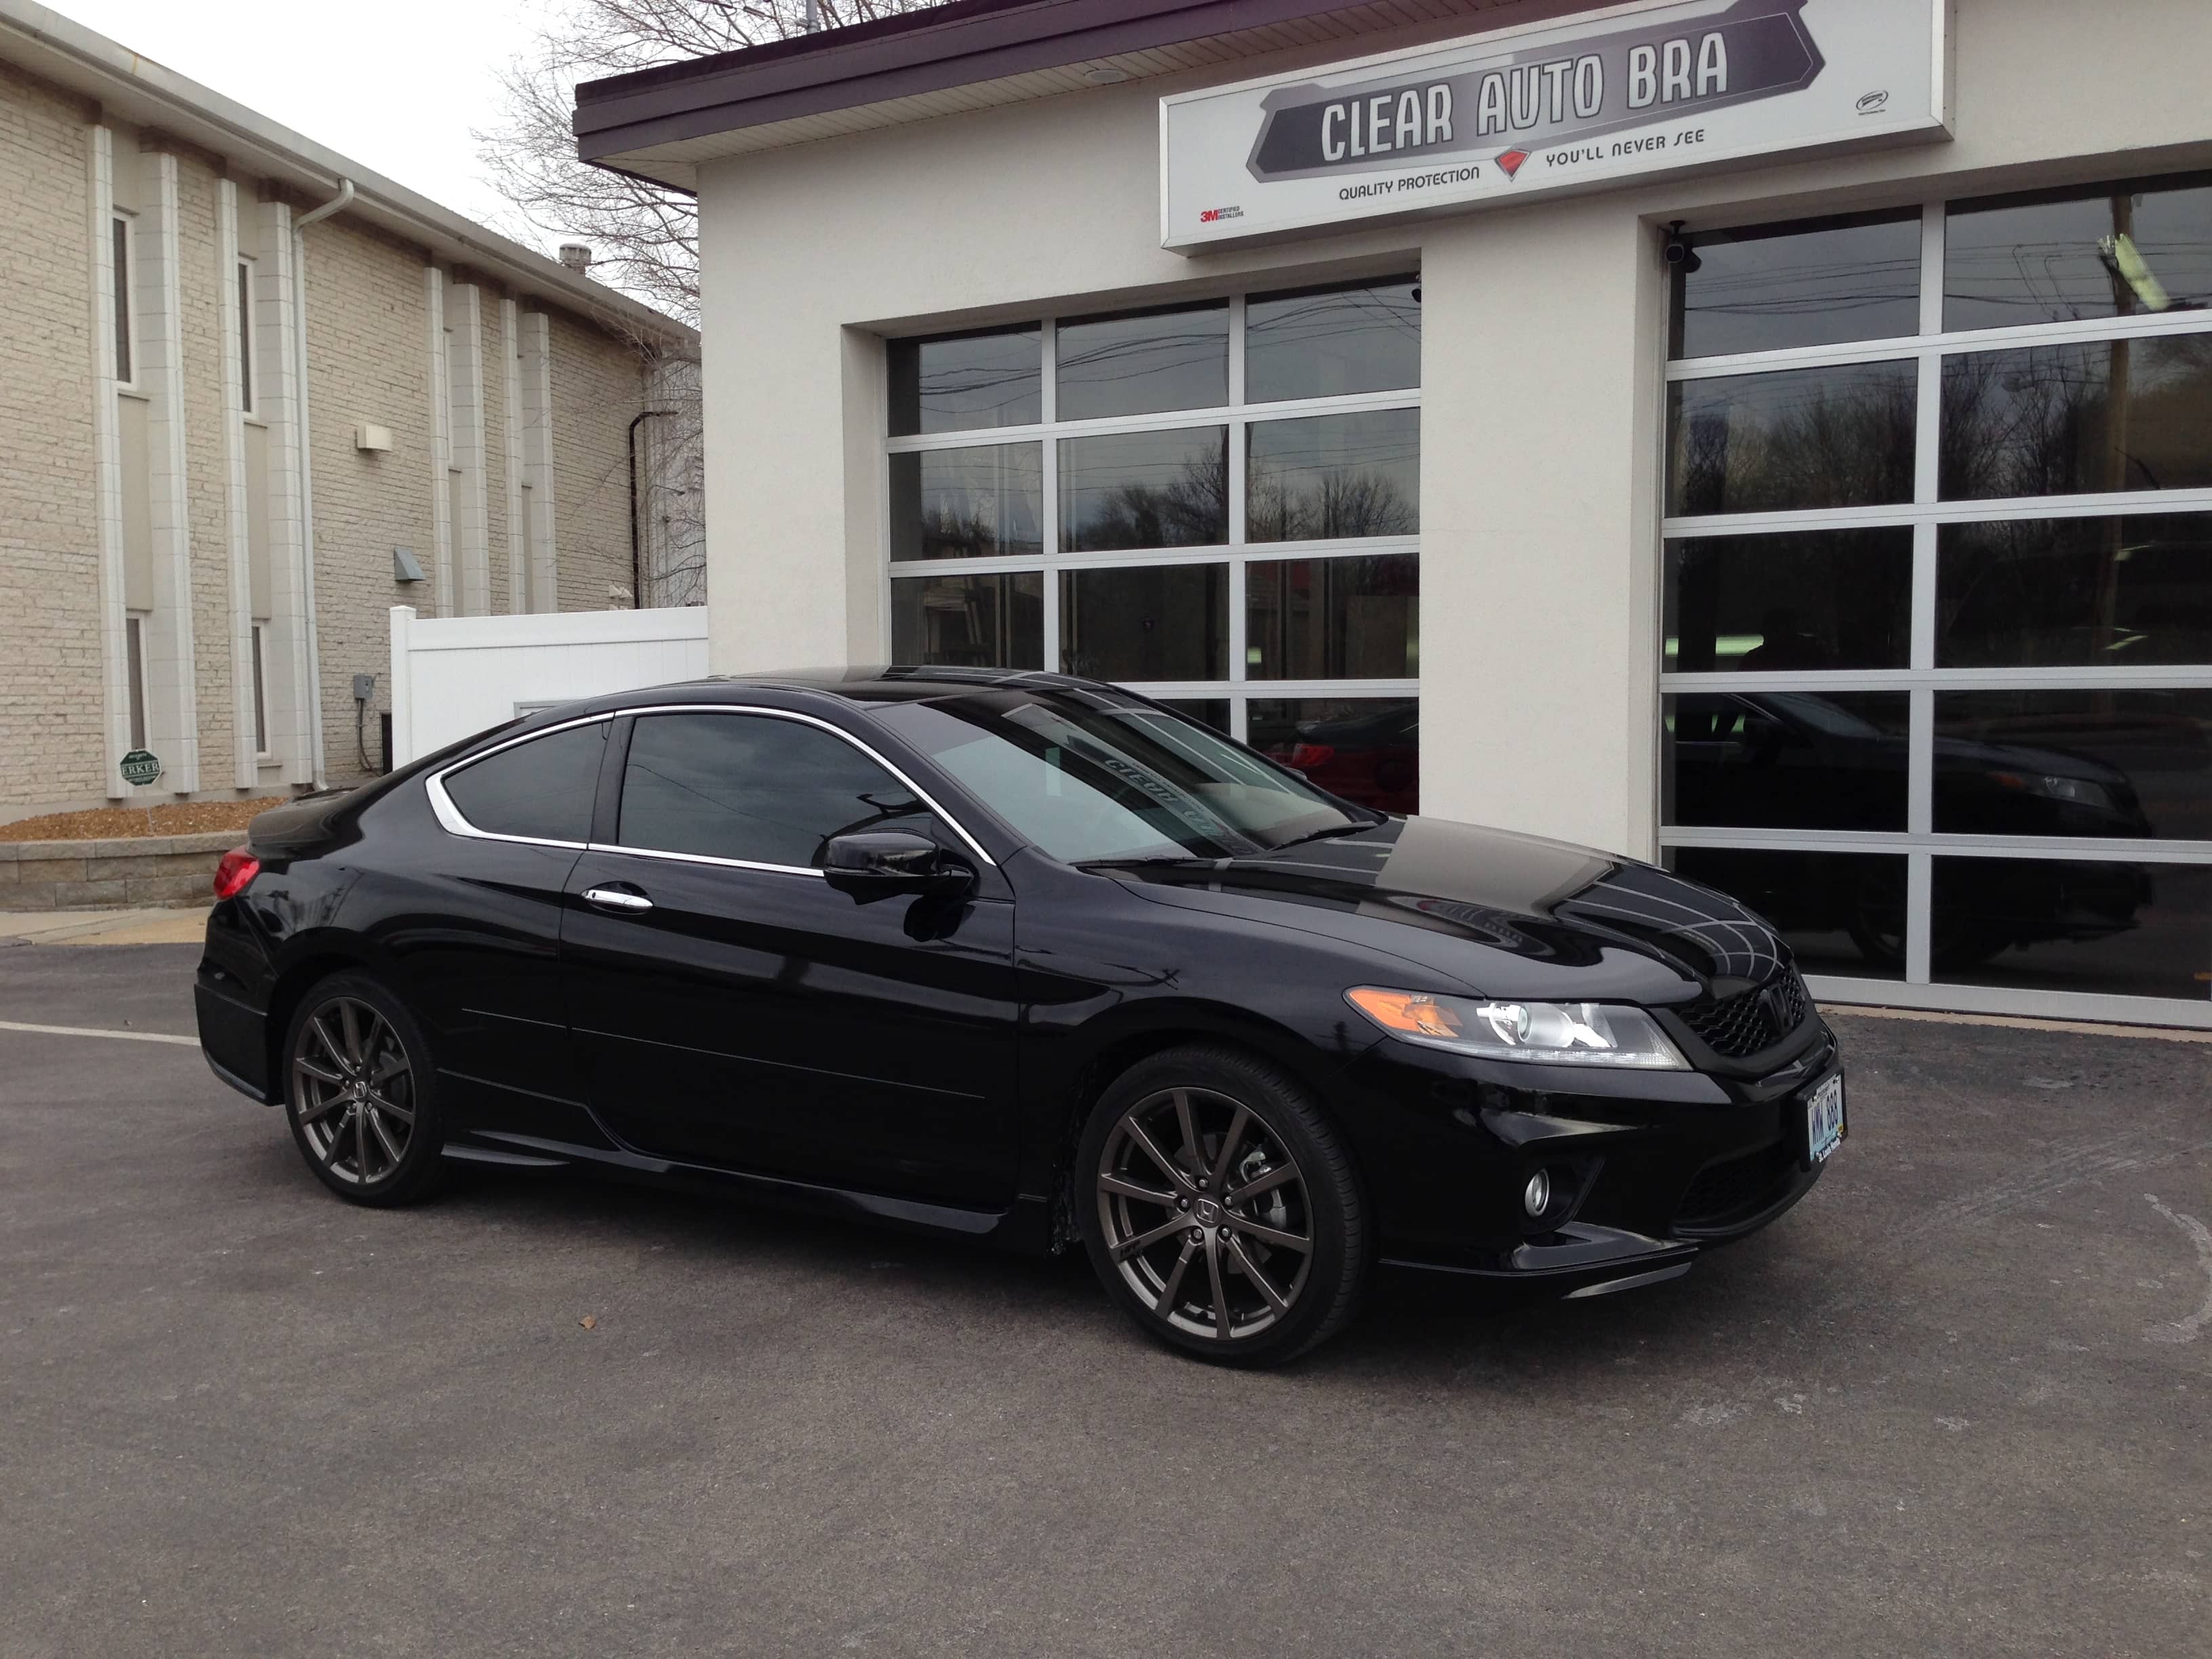 Honda Accord V6 Coupe HFP clear film paint protection St Louis